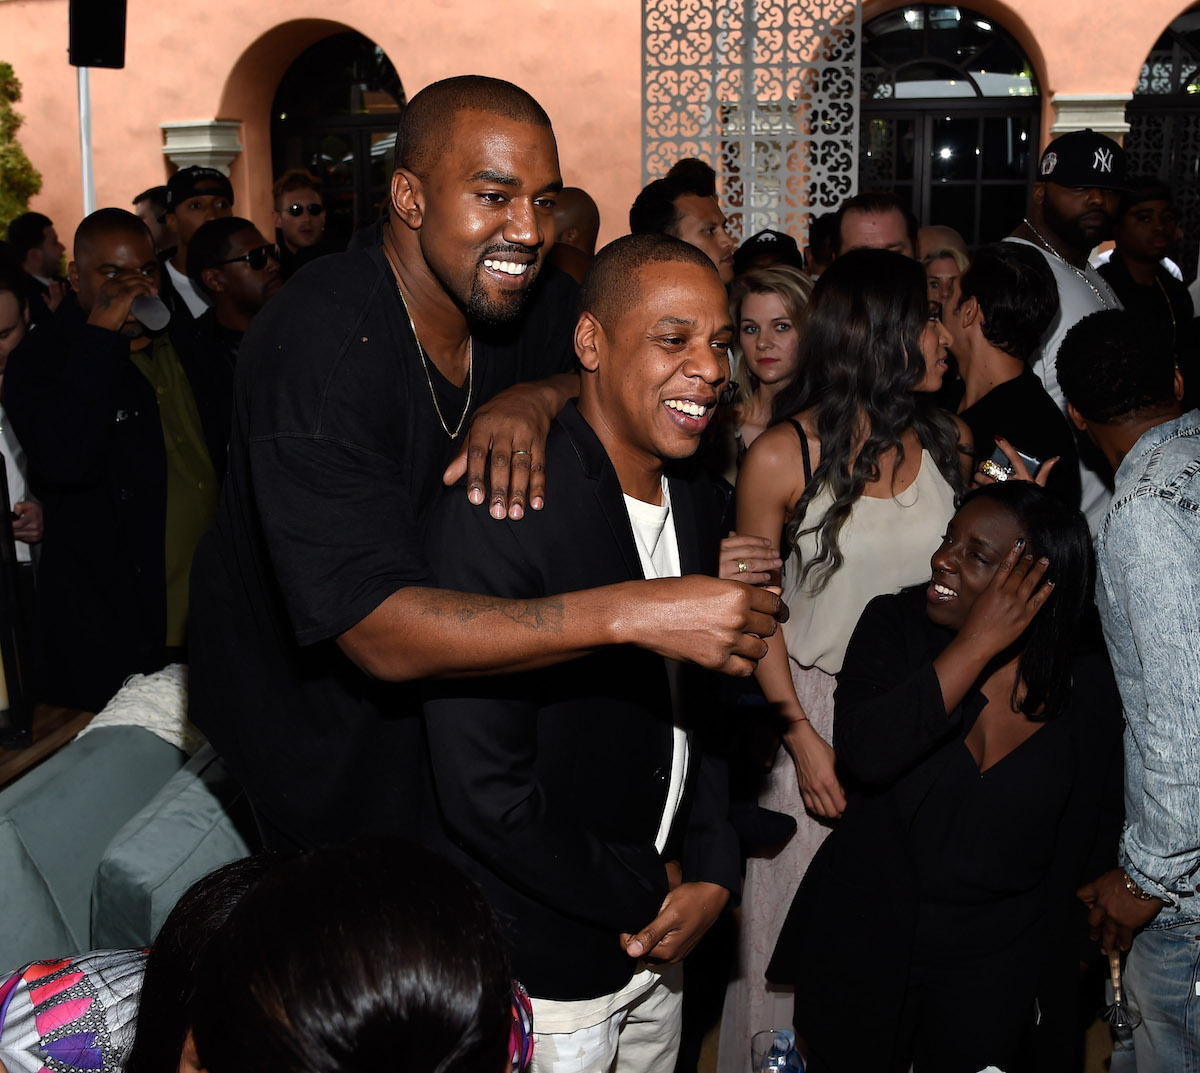 Rappers Kanye West and Jay-Z hug during the Roc Nation pre-GRAMMY Brunch in 2015